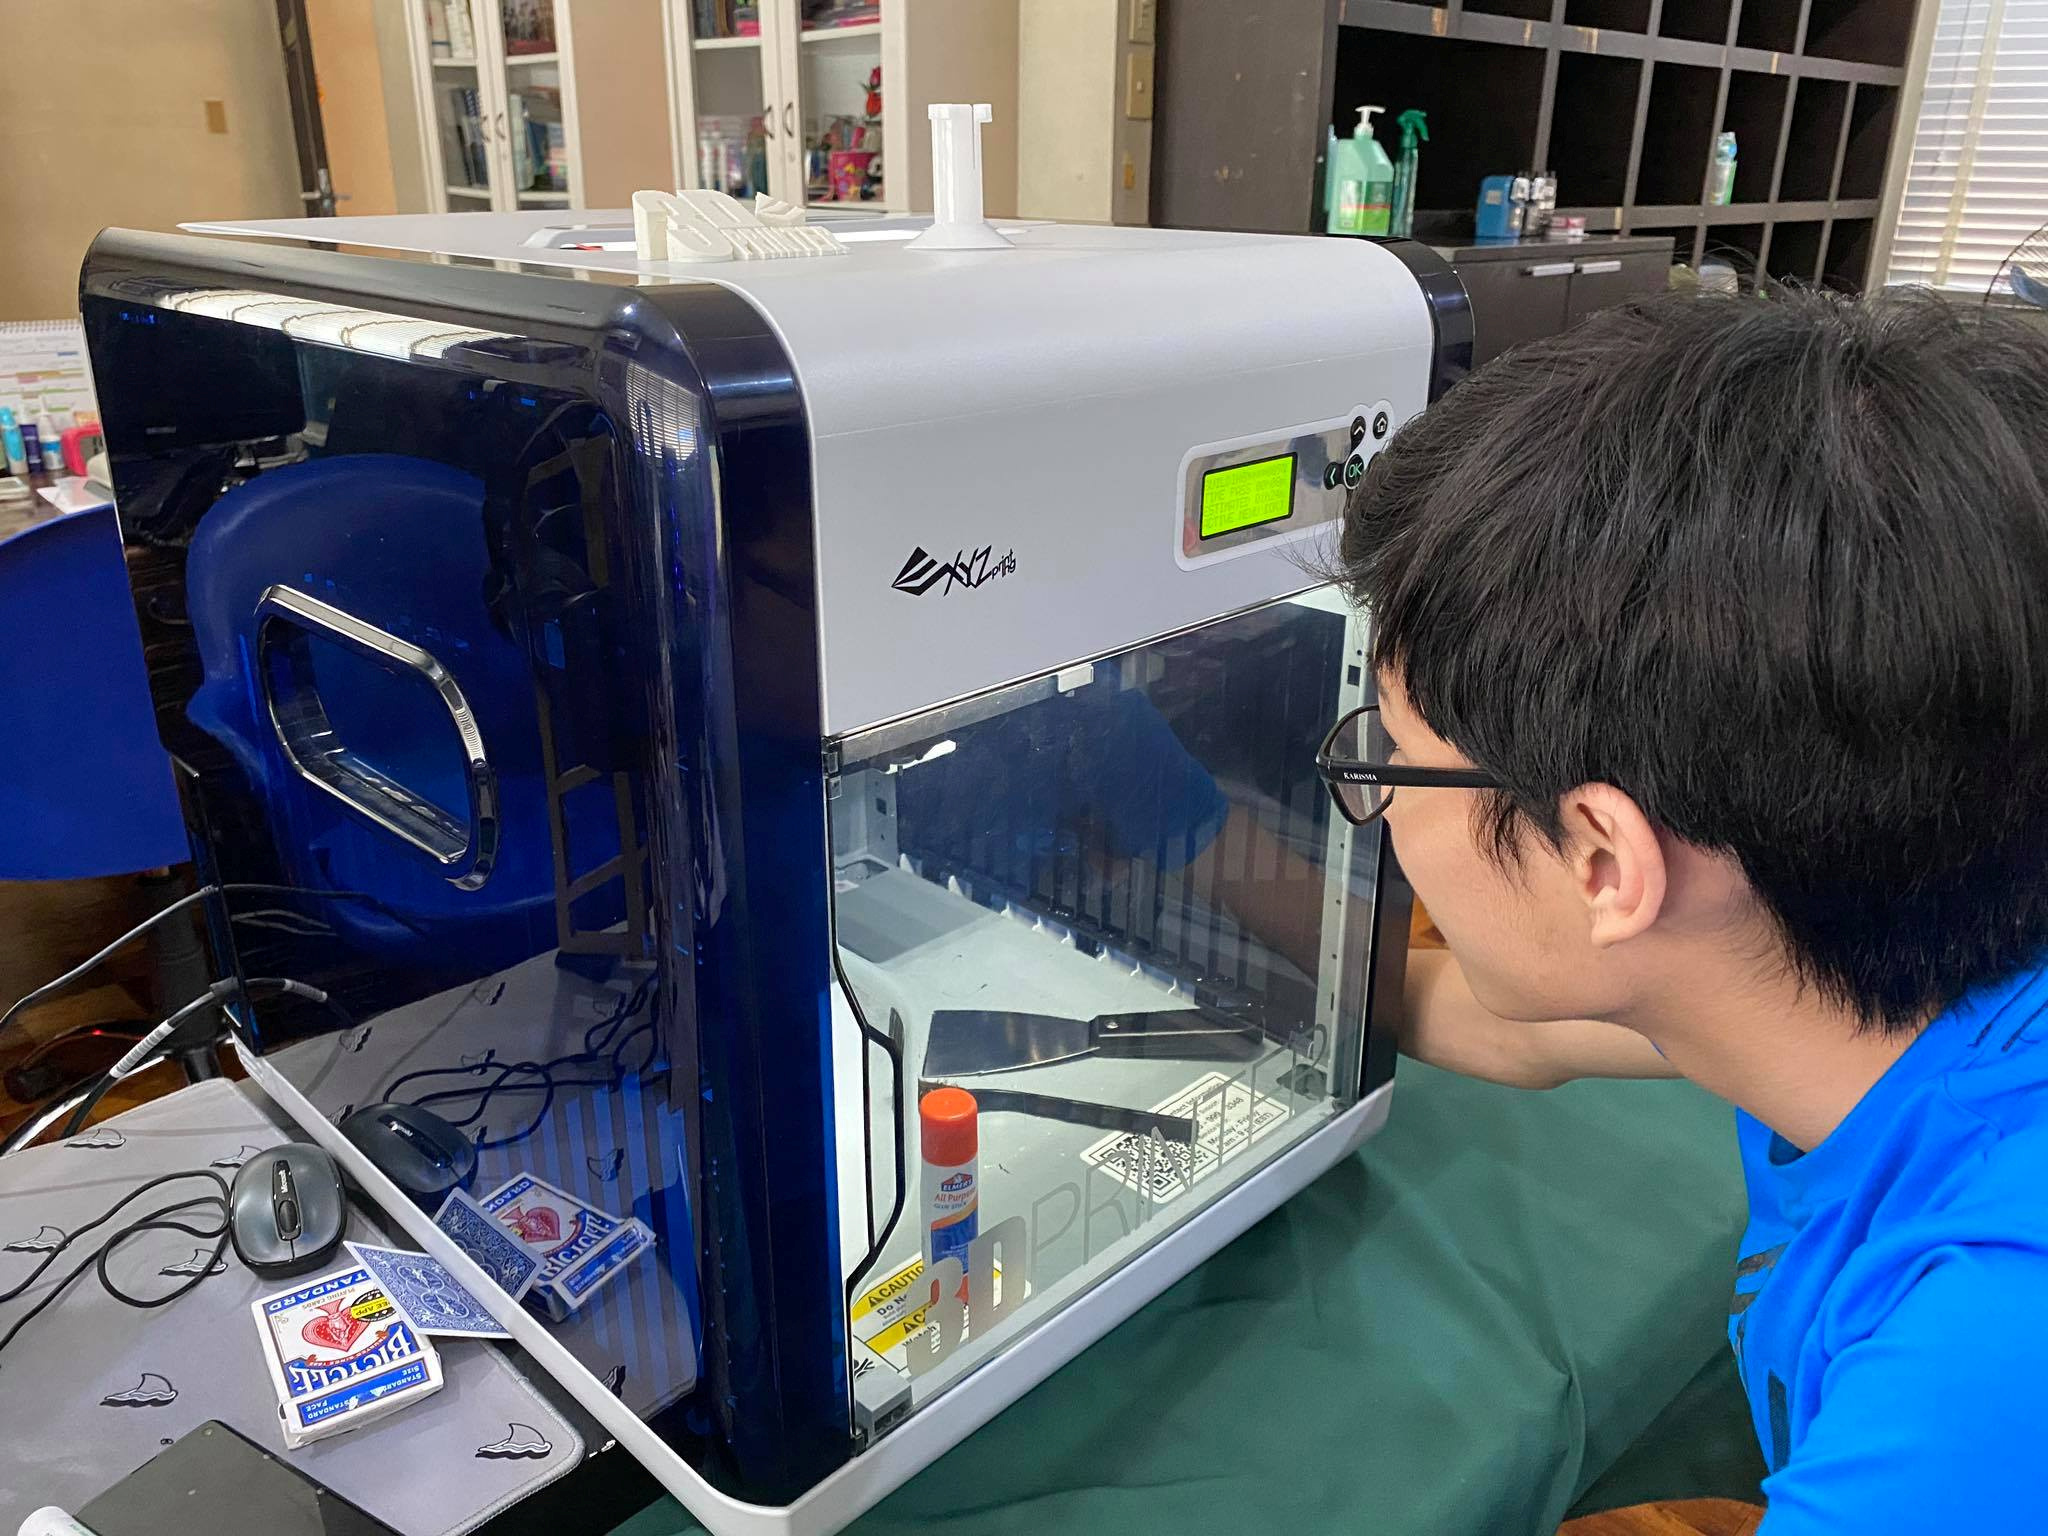 Filipino student Marcus Chu looks at his 3D printer while working on printing frames for his face shields at his home in Manila